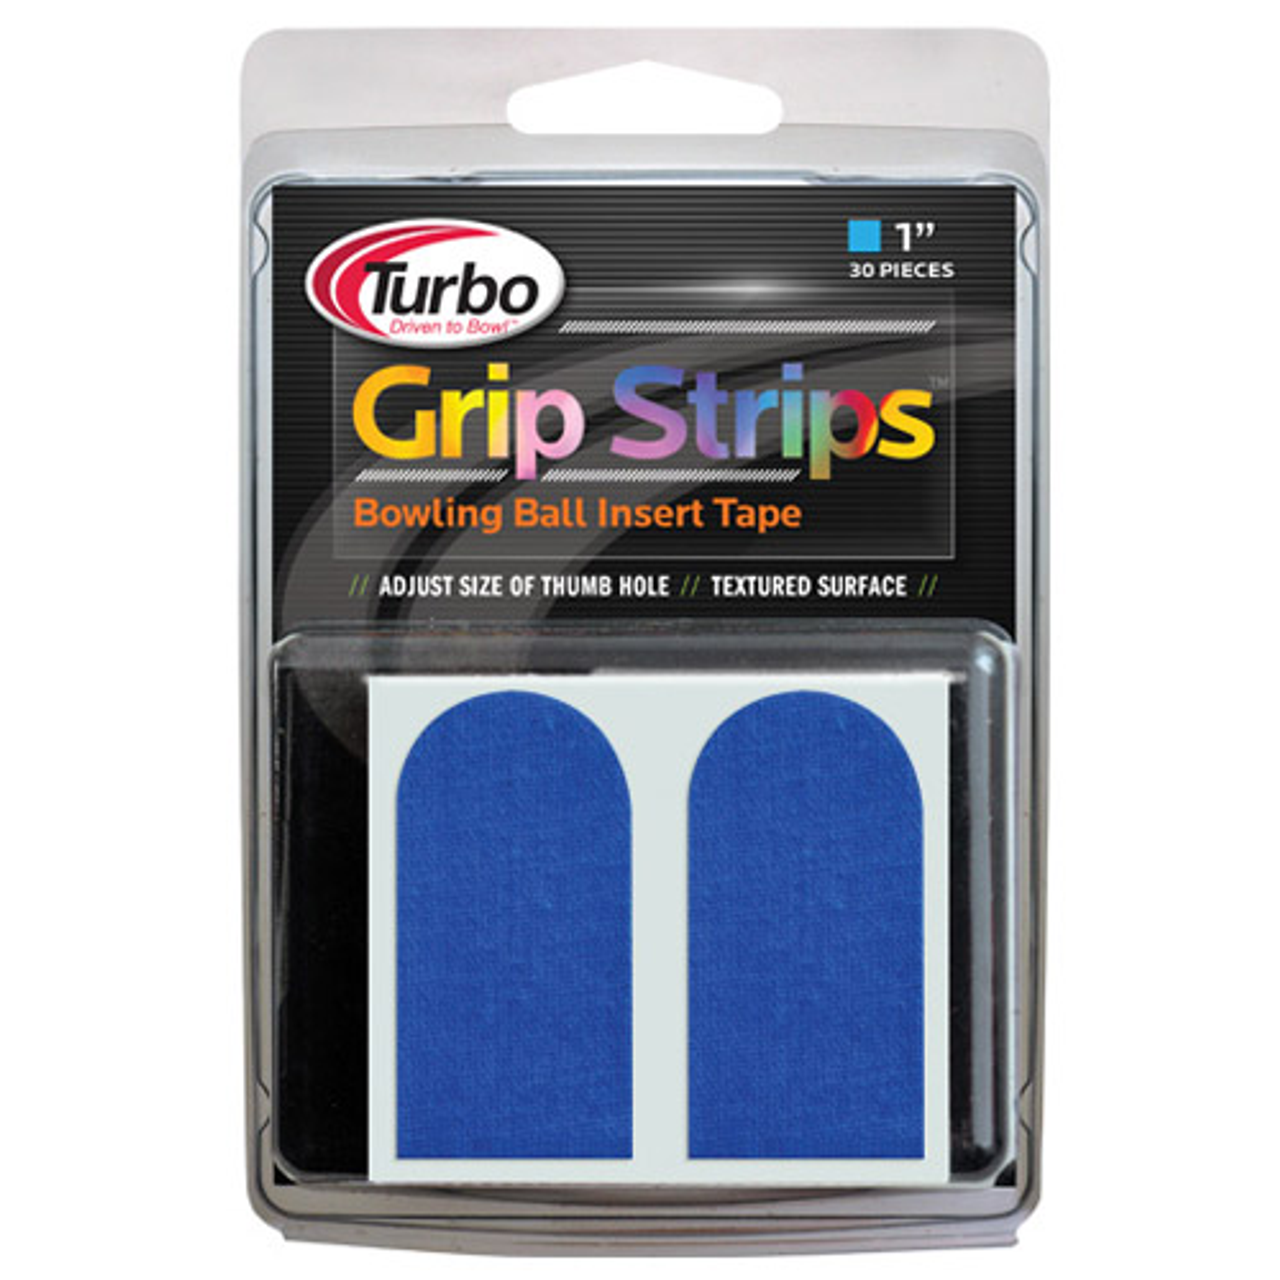 Turbo Grip Strips Tape 1" Electric Blue - 30 Pieces